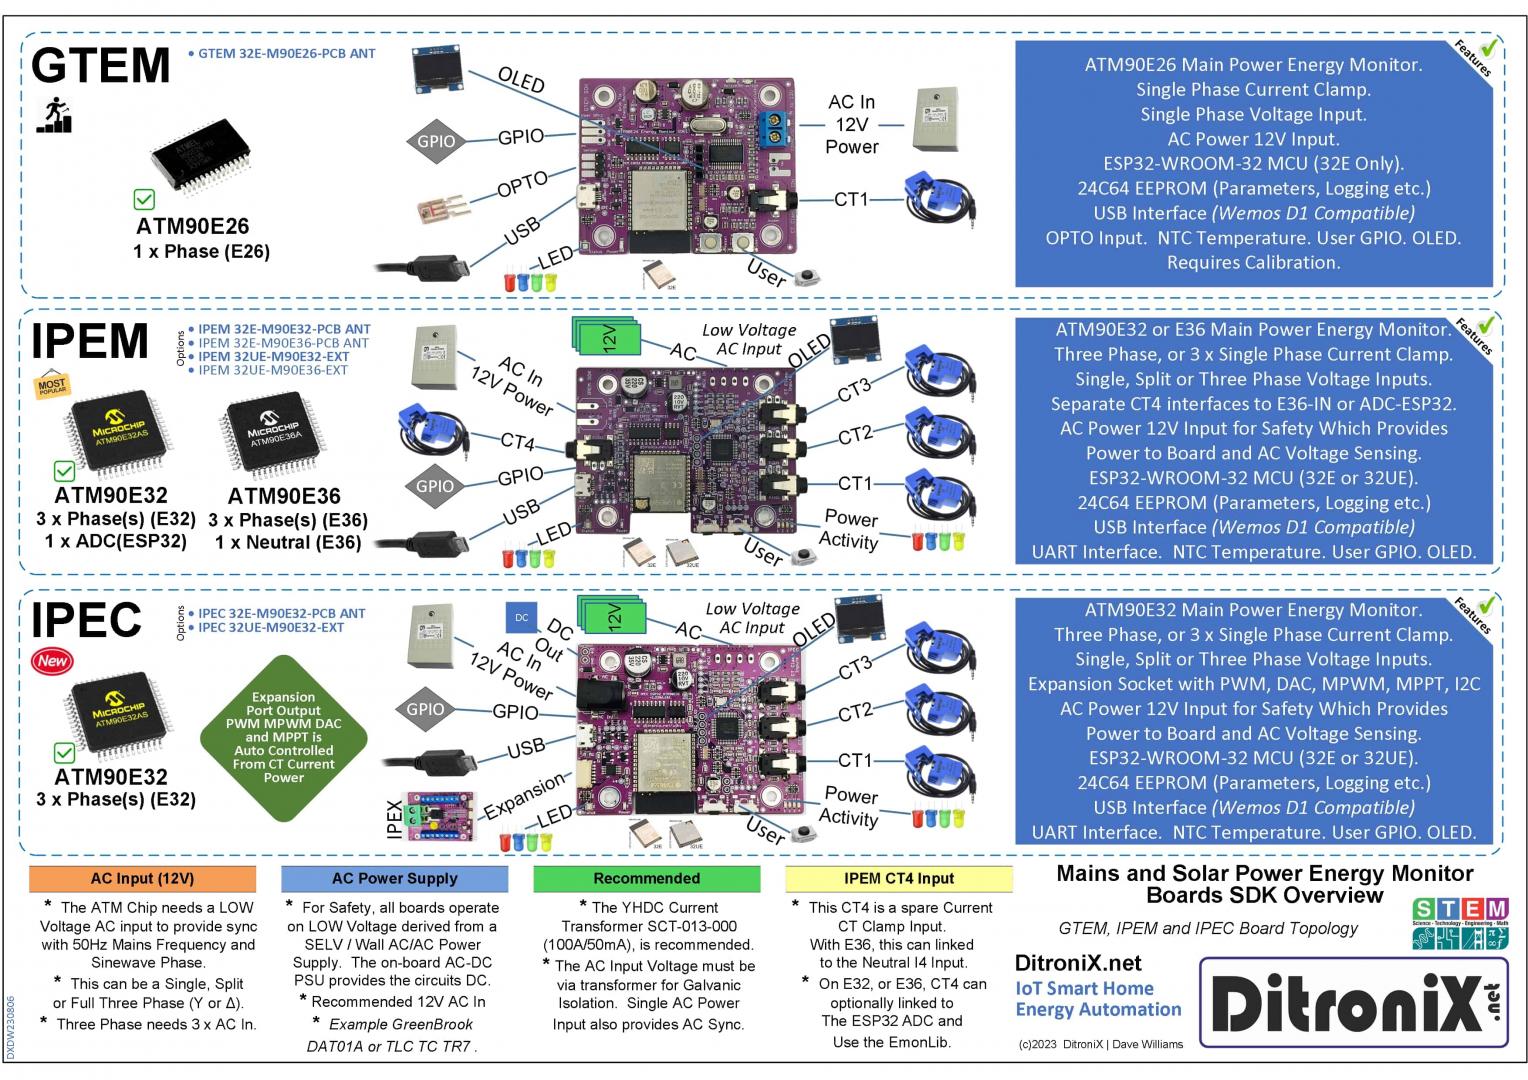 Mains and Solar Power Energy Monitor Boards SDK Overview